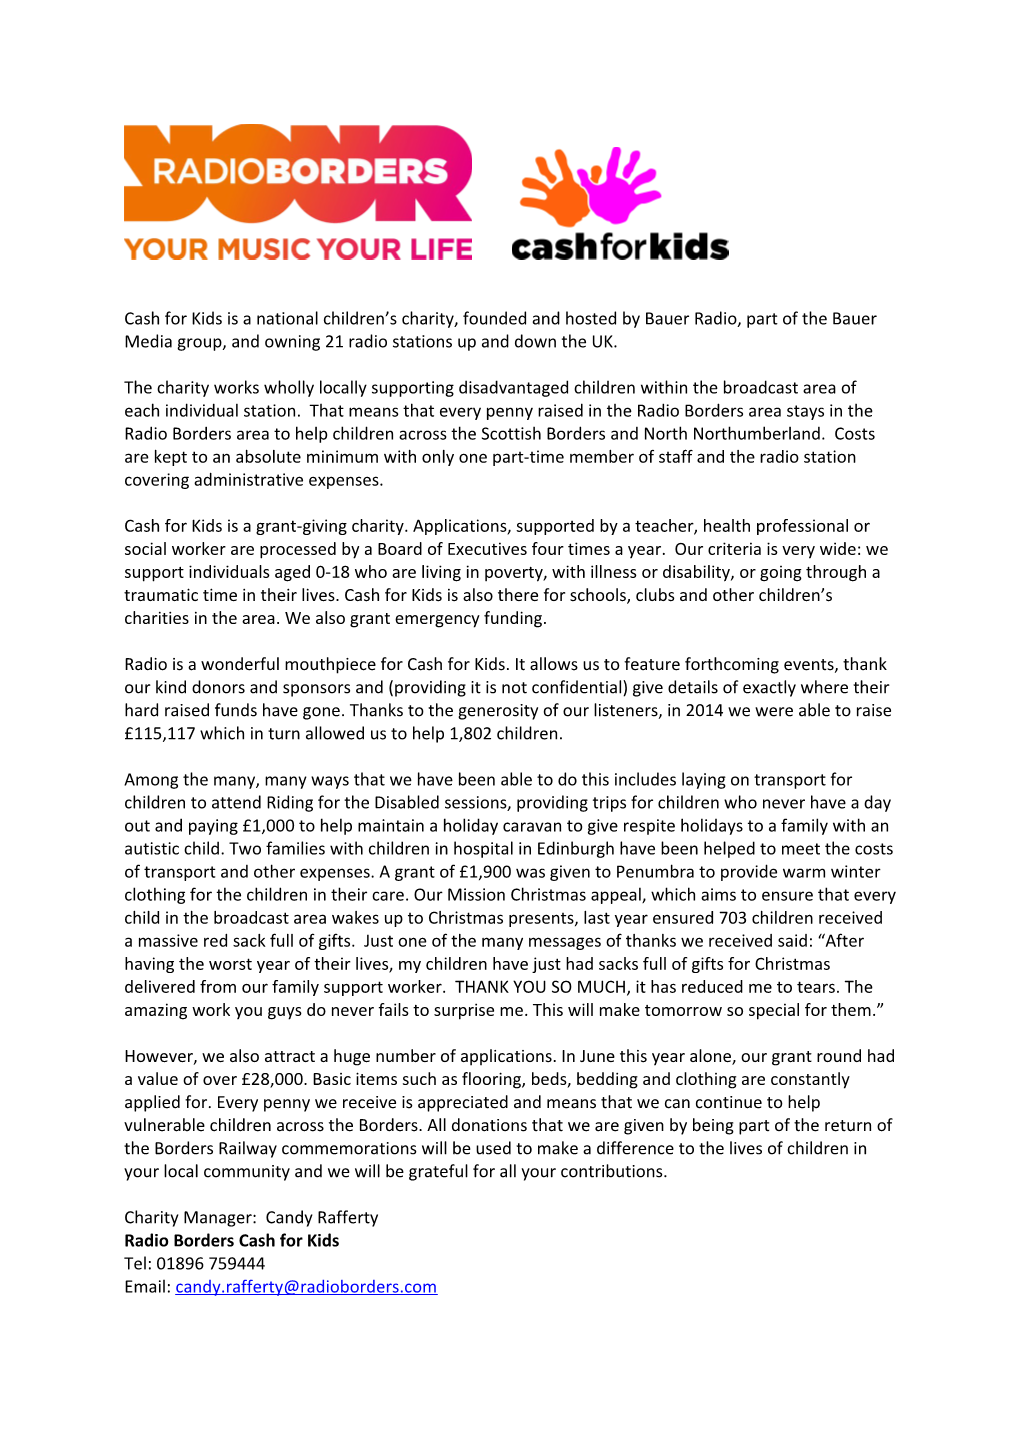 Cash for Kids Is a National Children S Charity, Founded and Hosted by Bauer Radio, Part